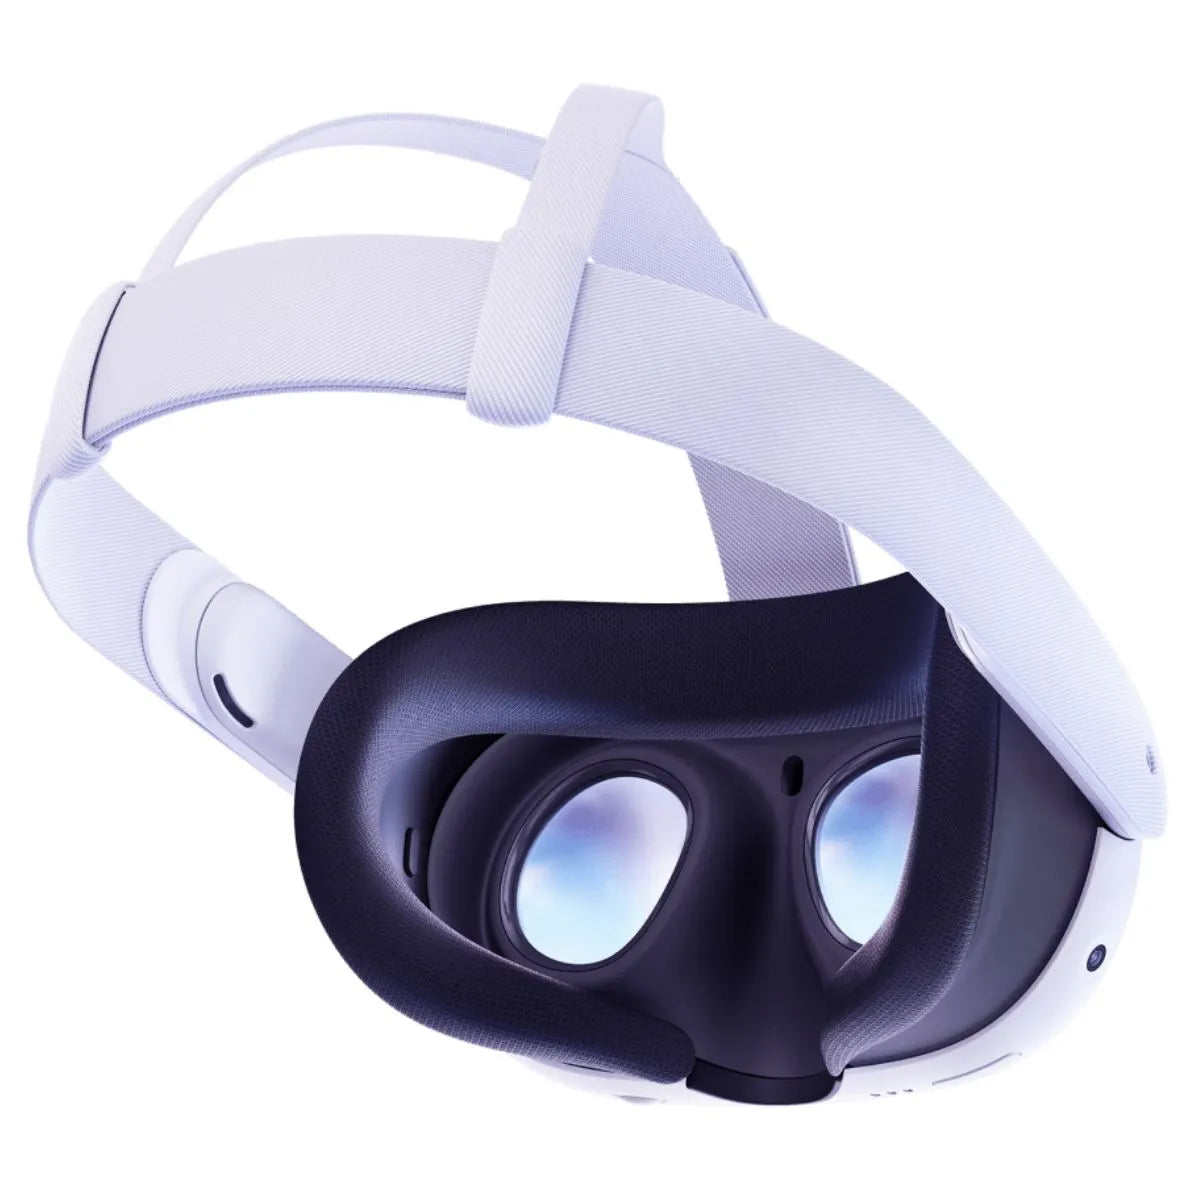 Meta Quest 3 - Virtual and Mixed Reality Headset - 128GB